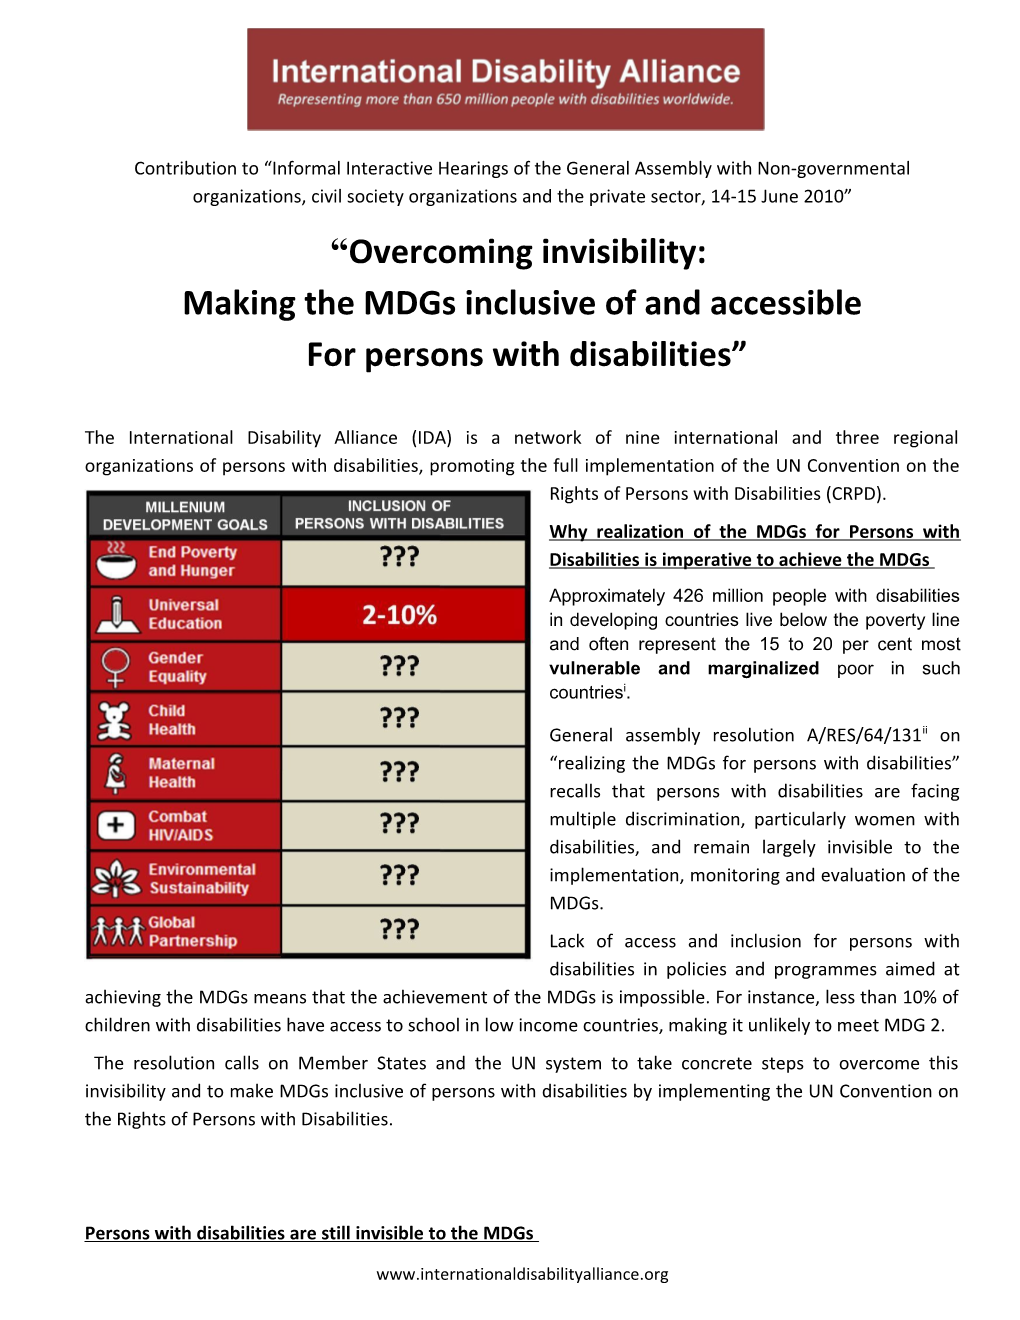 Making the Mdgs Inclusive of and Accessible